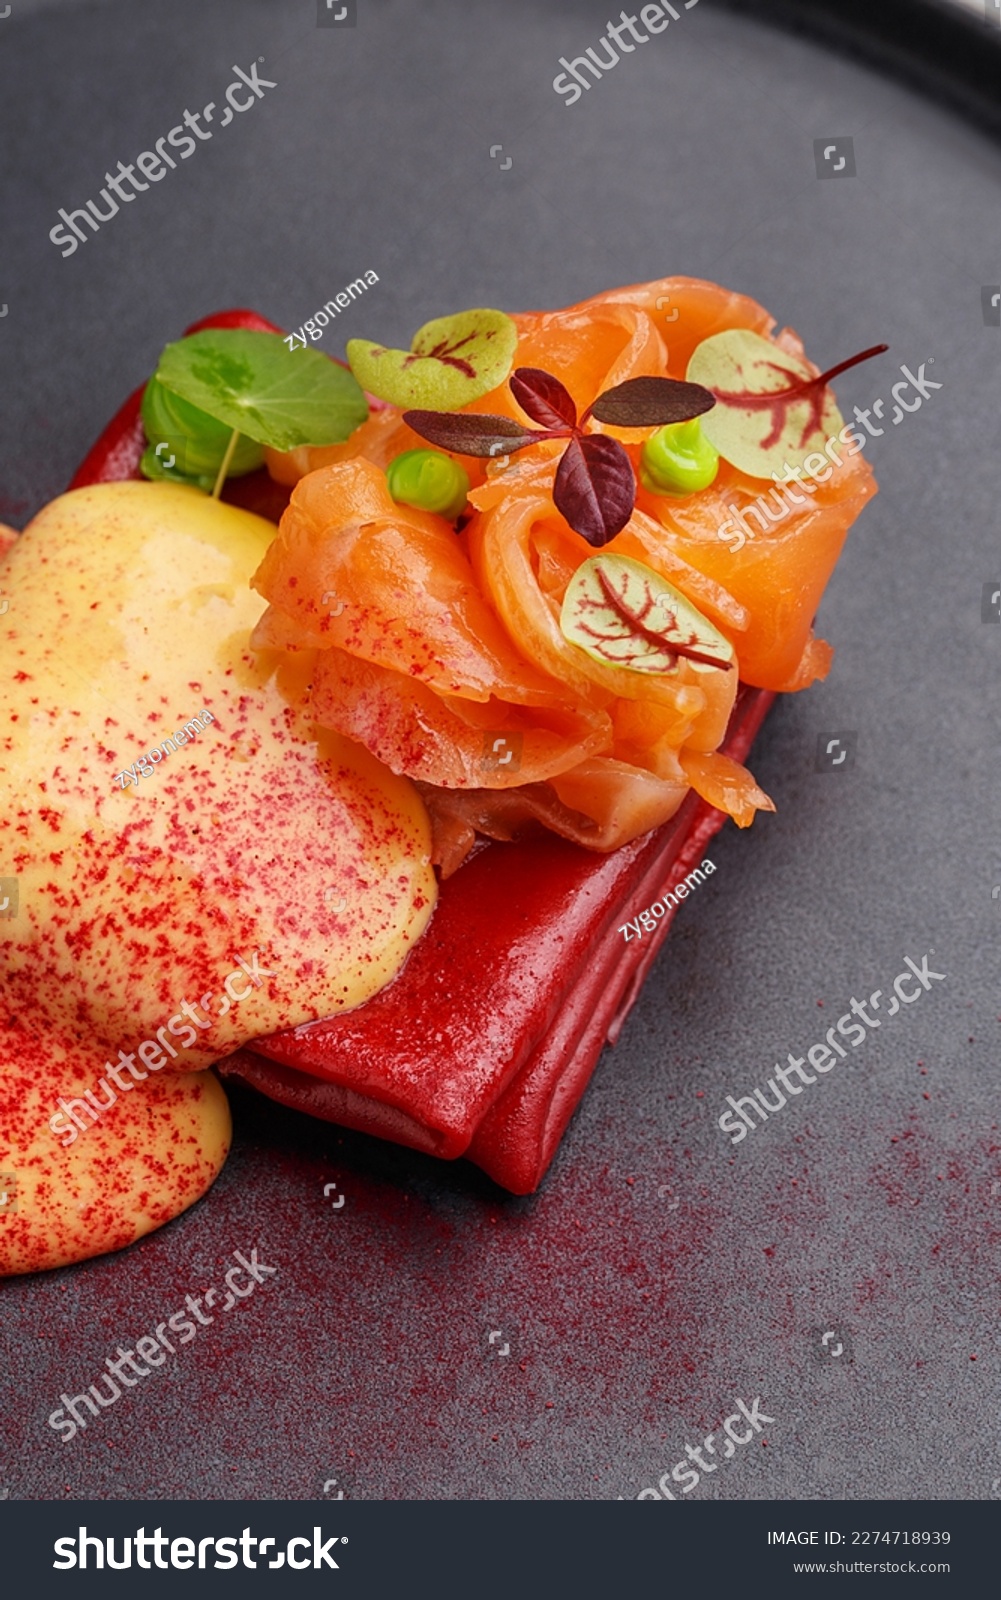 Colorful red crepes or blini with salmon and hollandaise sauce, decorated with micro greens on black plate. Gourmet snack. Fine dining. Close up view #2274718939